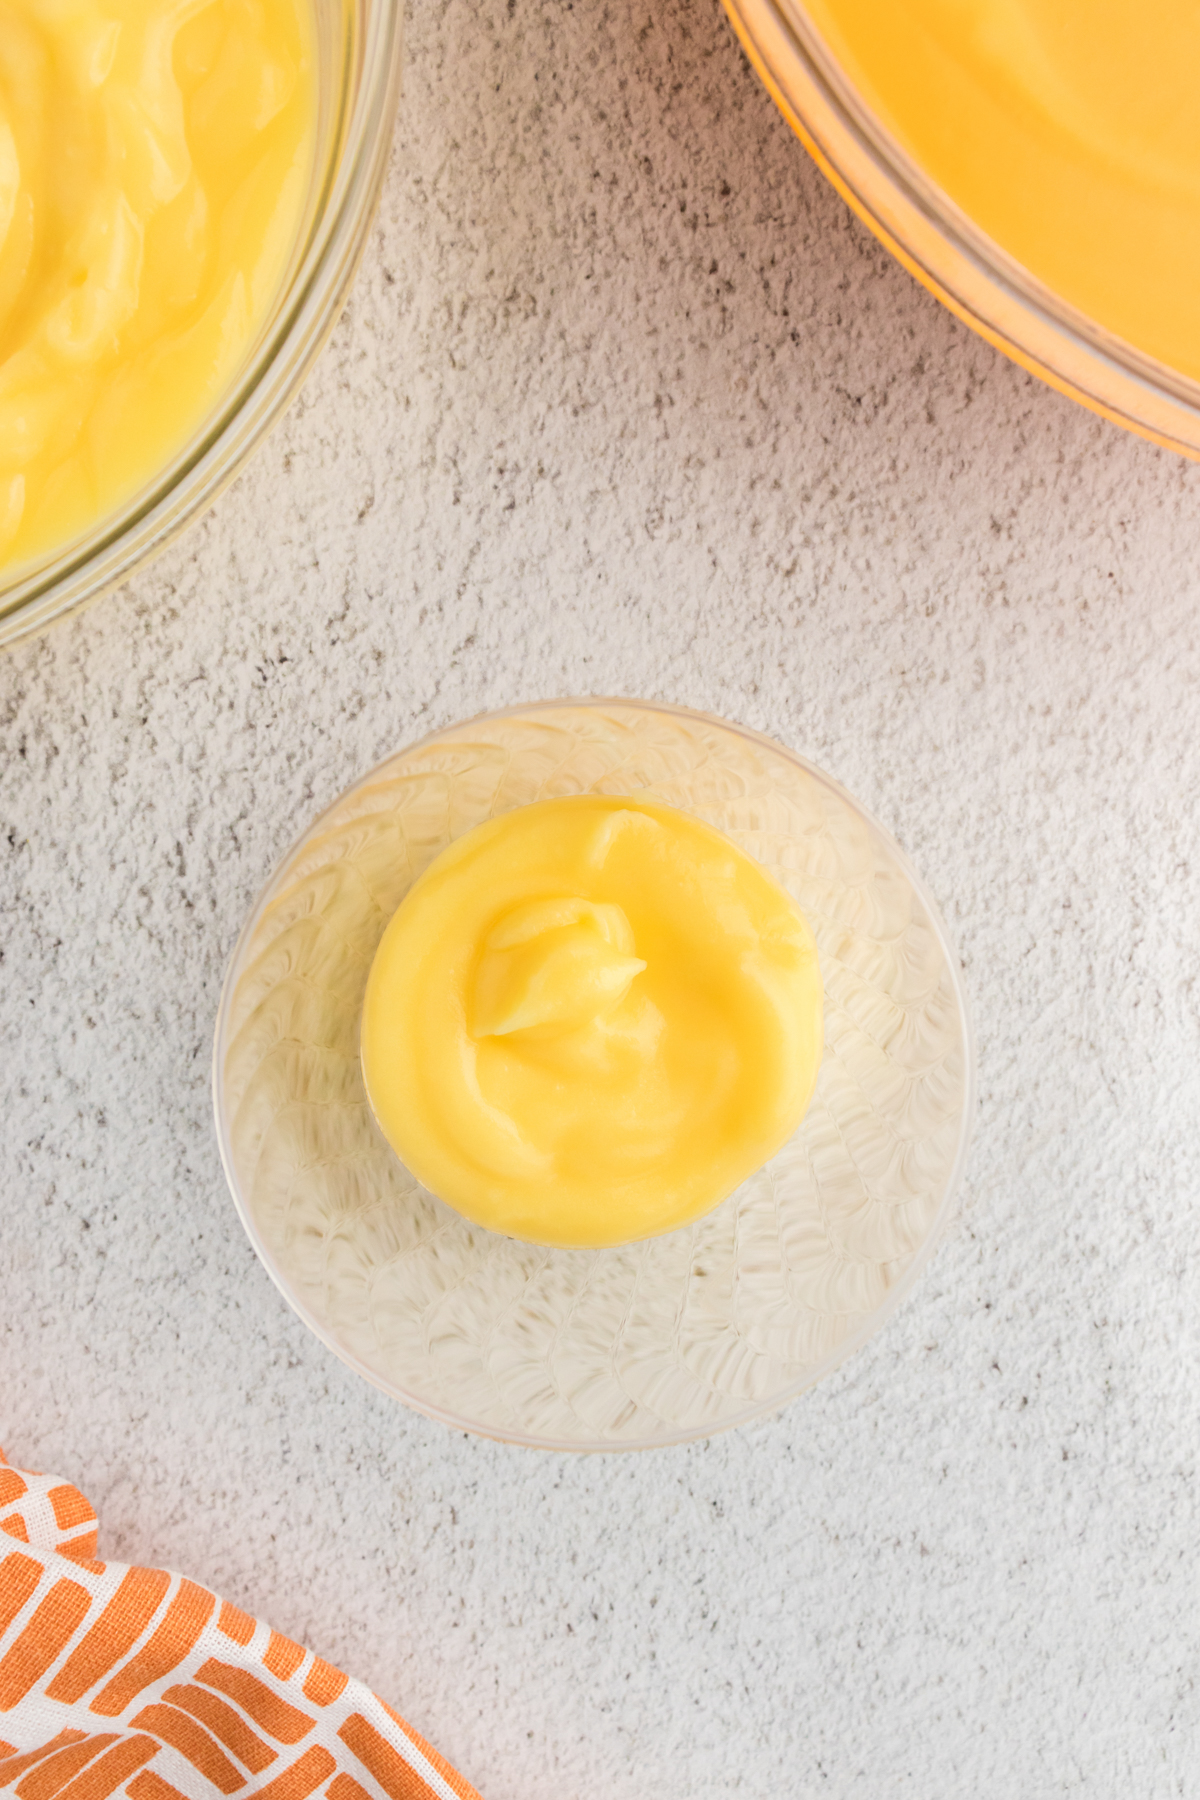 plastic cup with yellow pudding inside